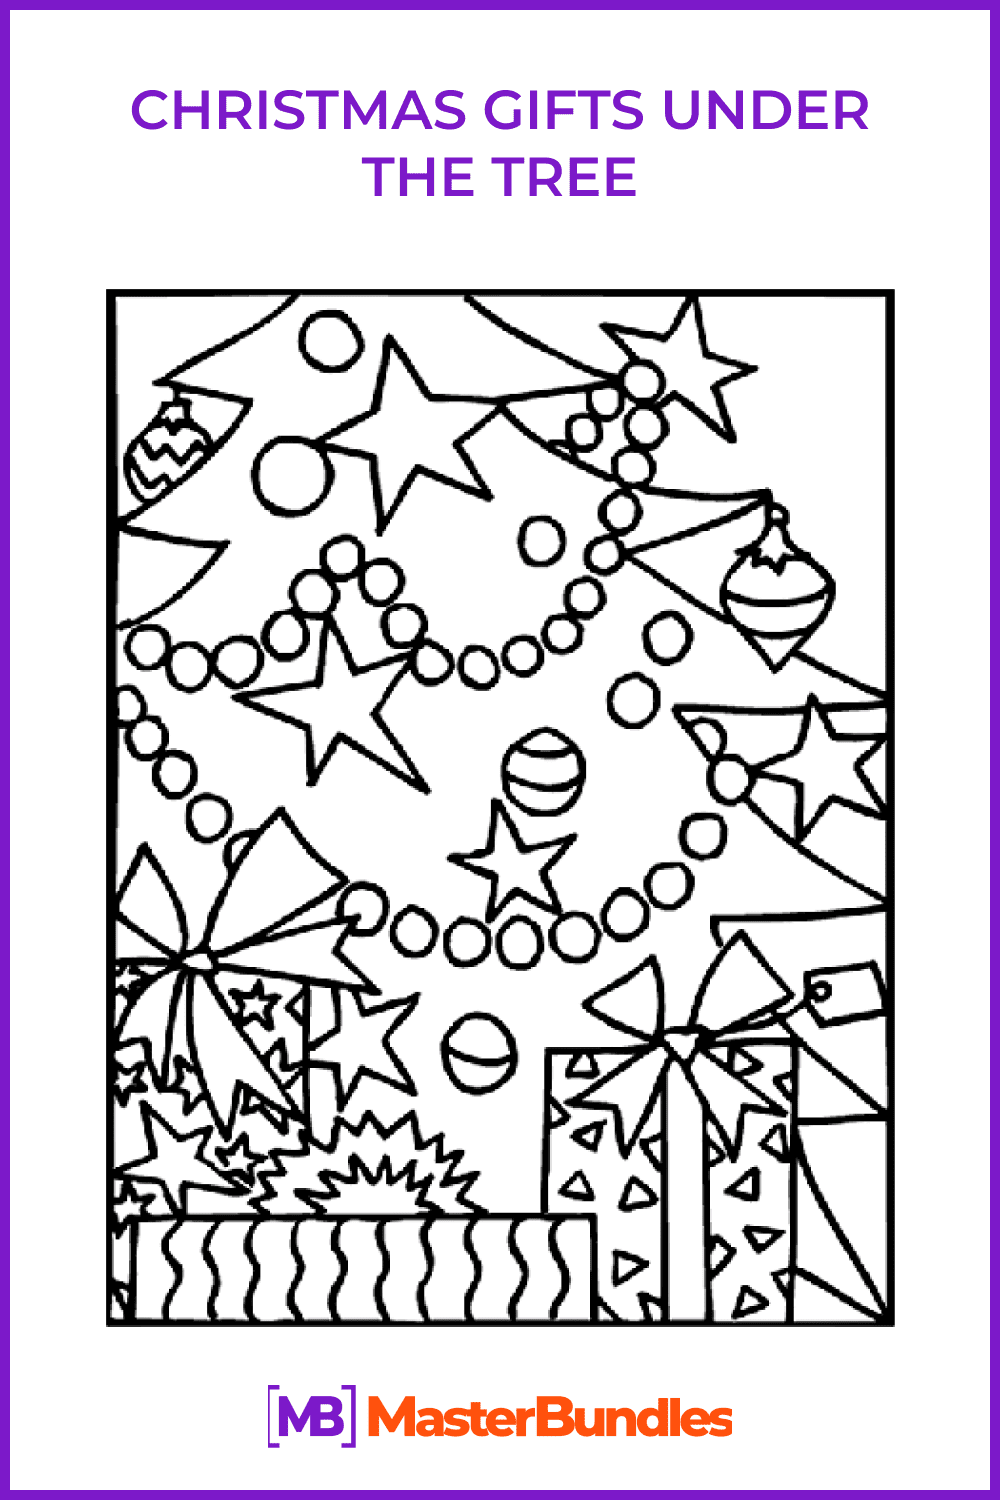 Christmas gifts under the tree coloring page pinterest image.